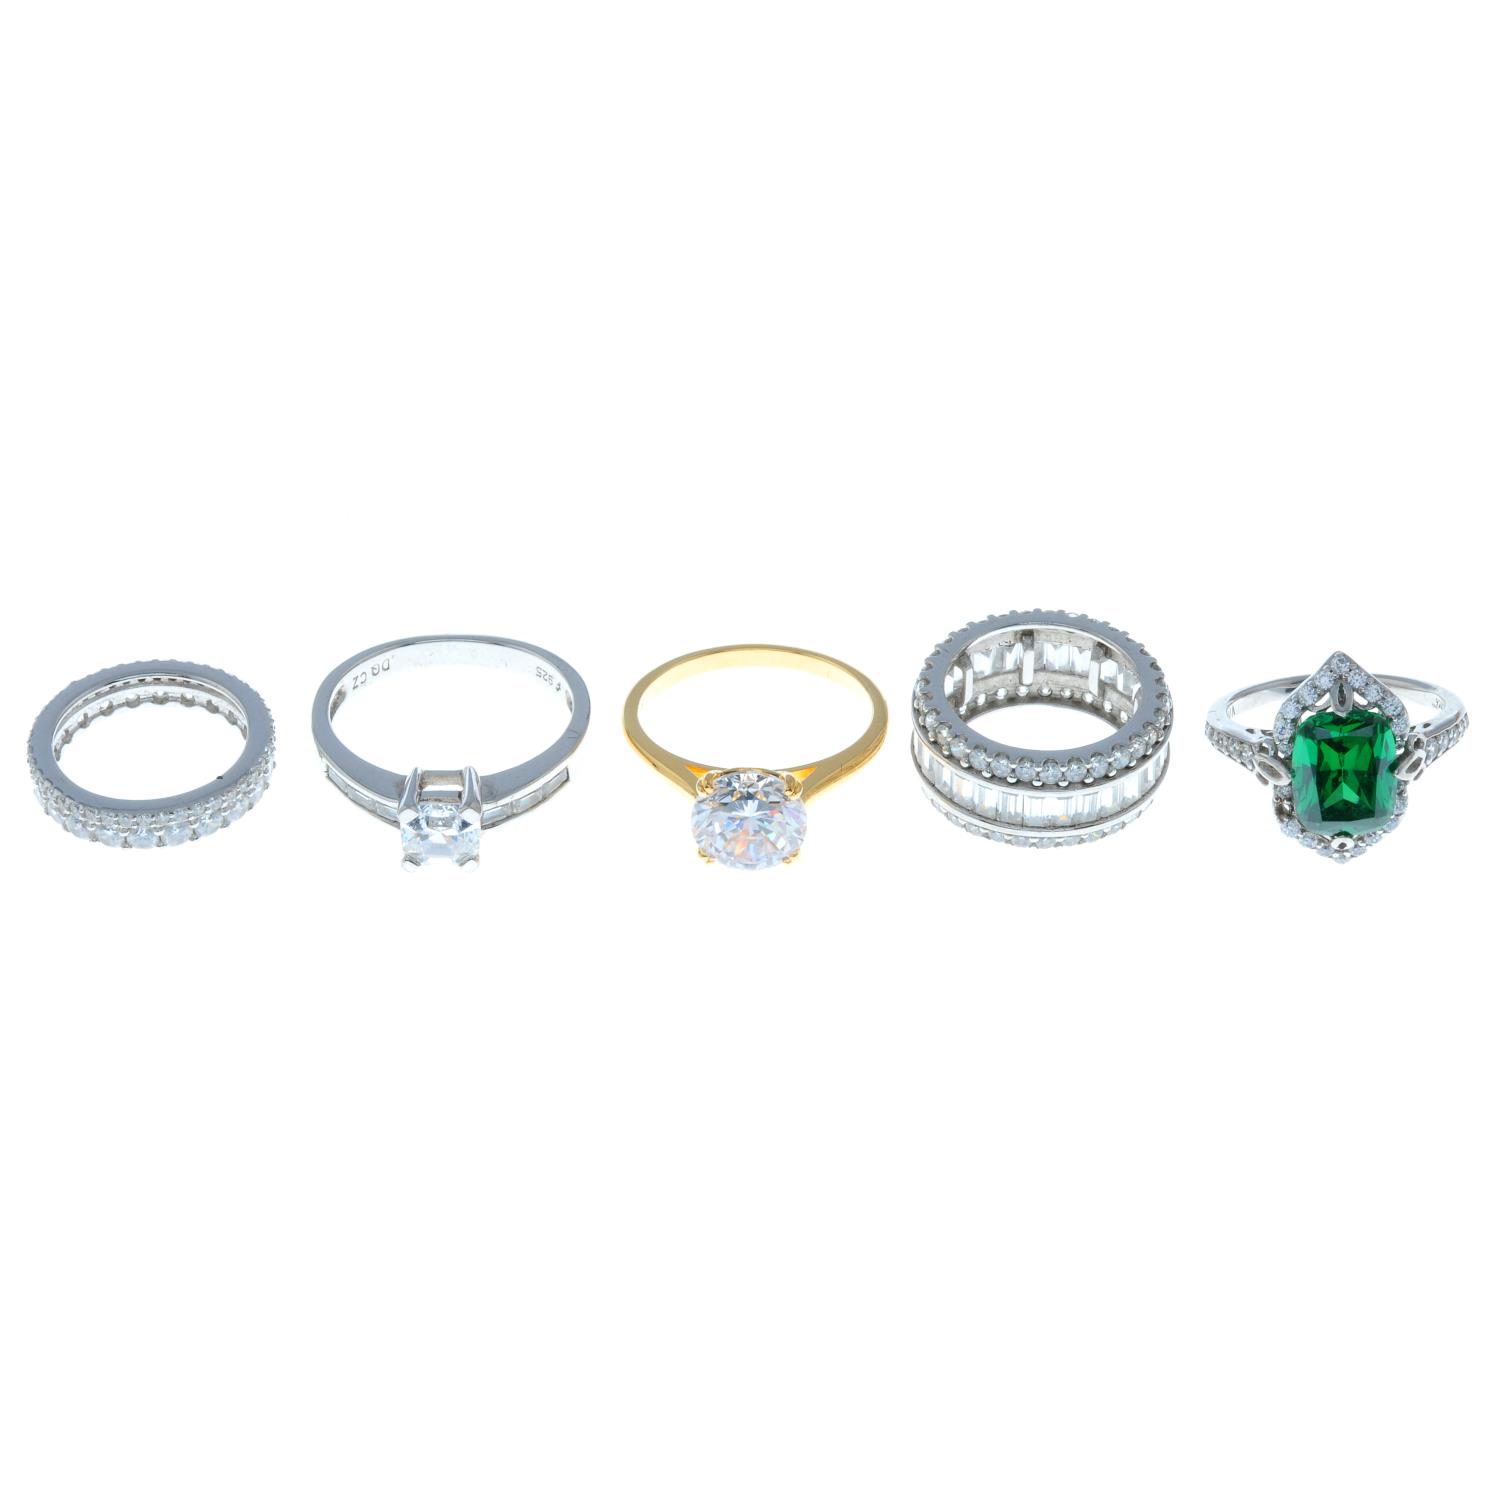 Eleven cubic zirconia and gem-set rings, - Image 3 of 3